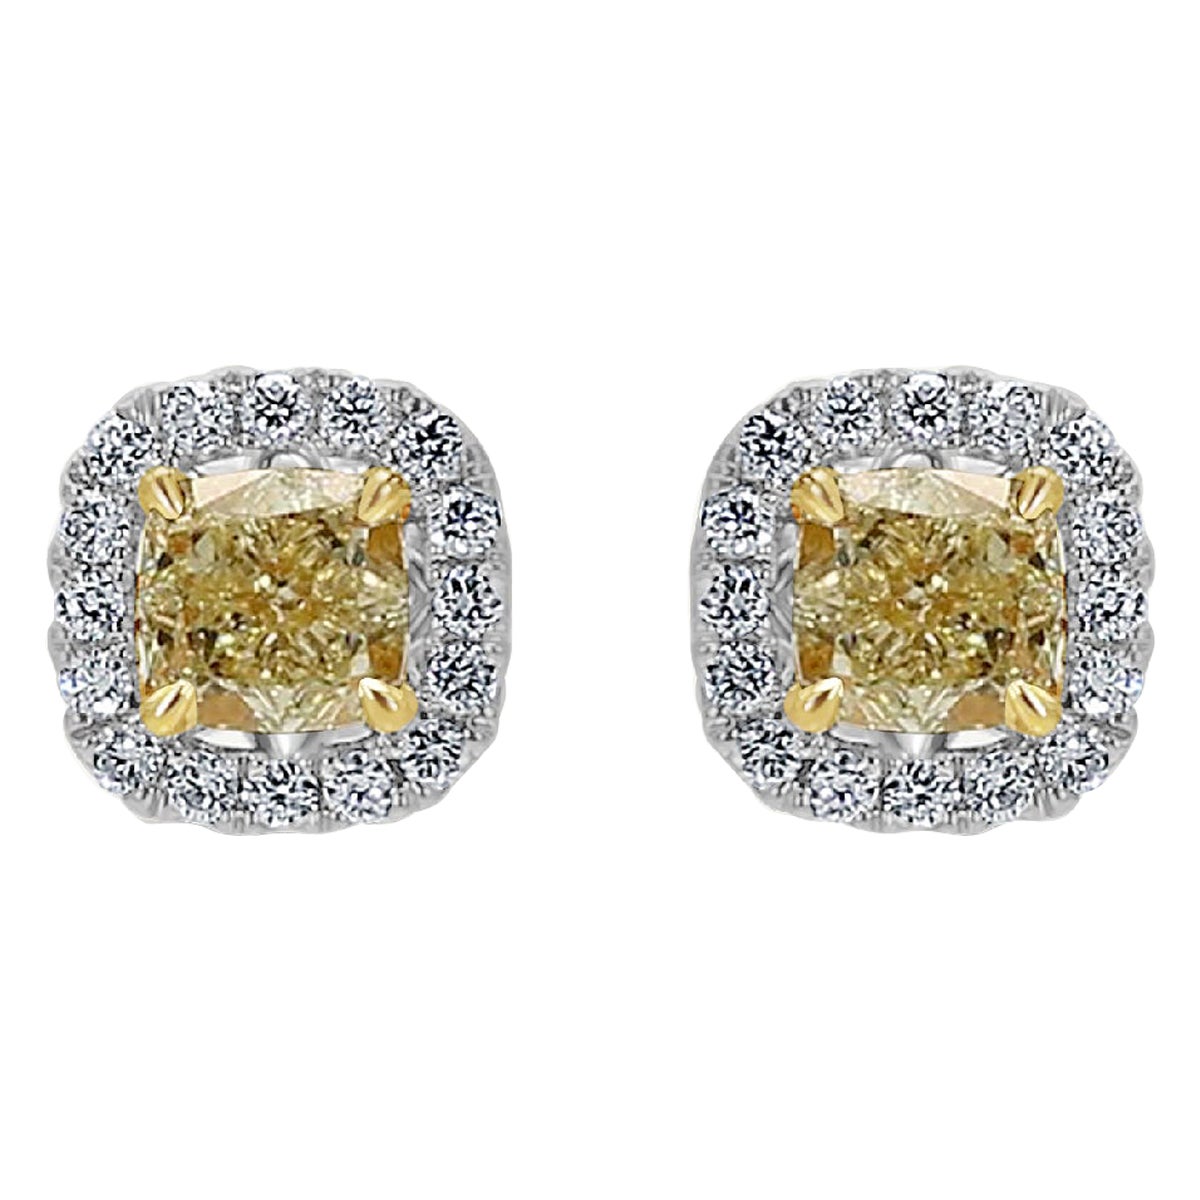 Natural Yellow Cushions and White Diamond 1.70 Carat TW Gold Stud Earrings For Sale